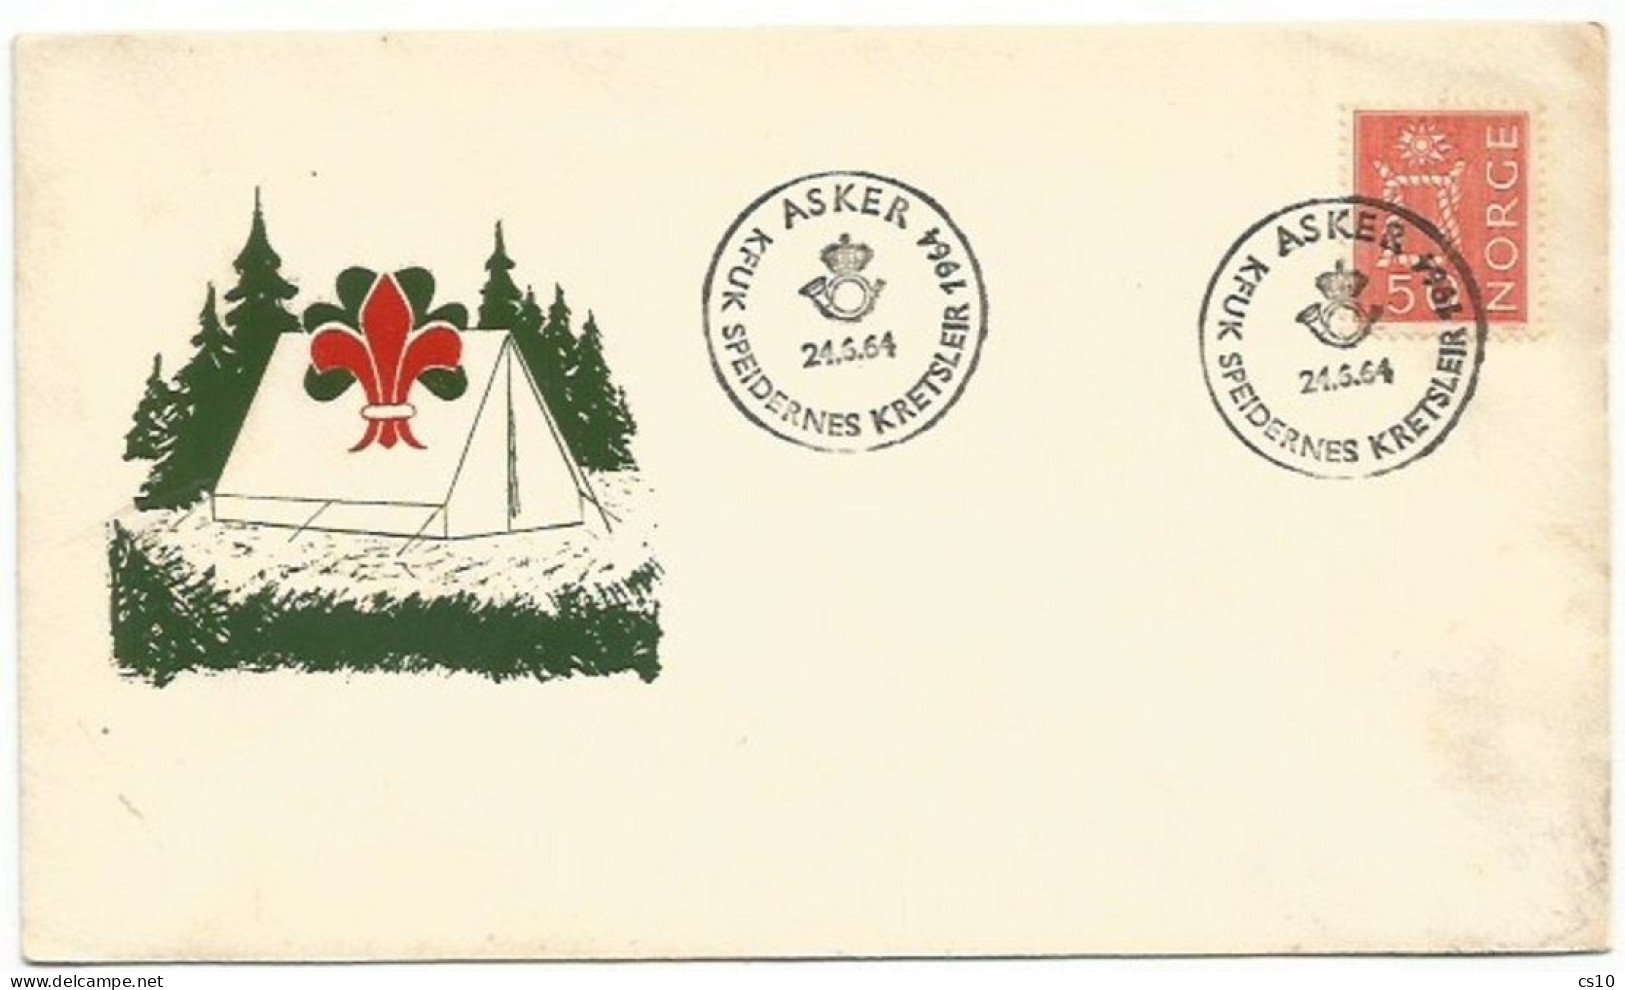 Scout Explorers Camp In Norway - Special Cachet Asker 24jun1964 On Official CV - Storia Postale